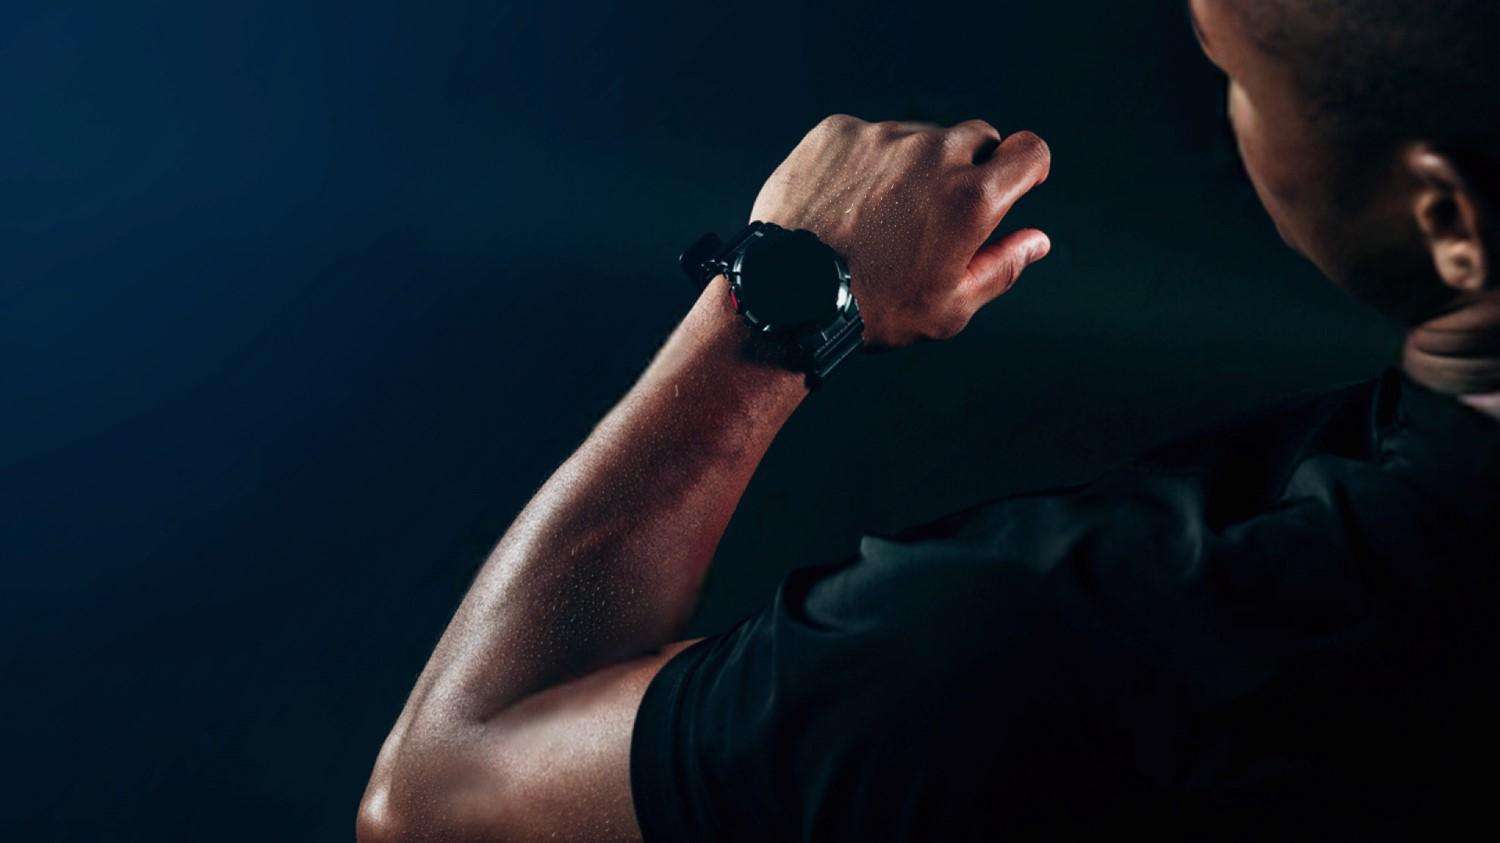 Athlete looking at his smart watch